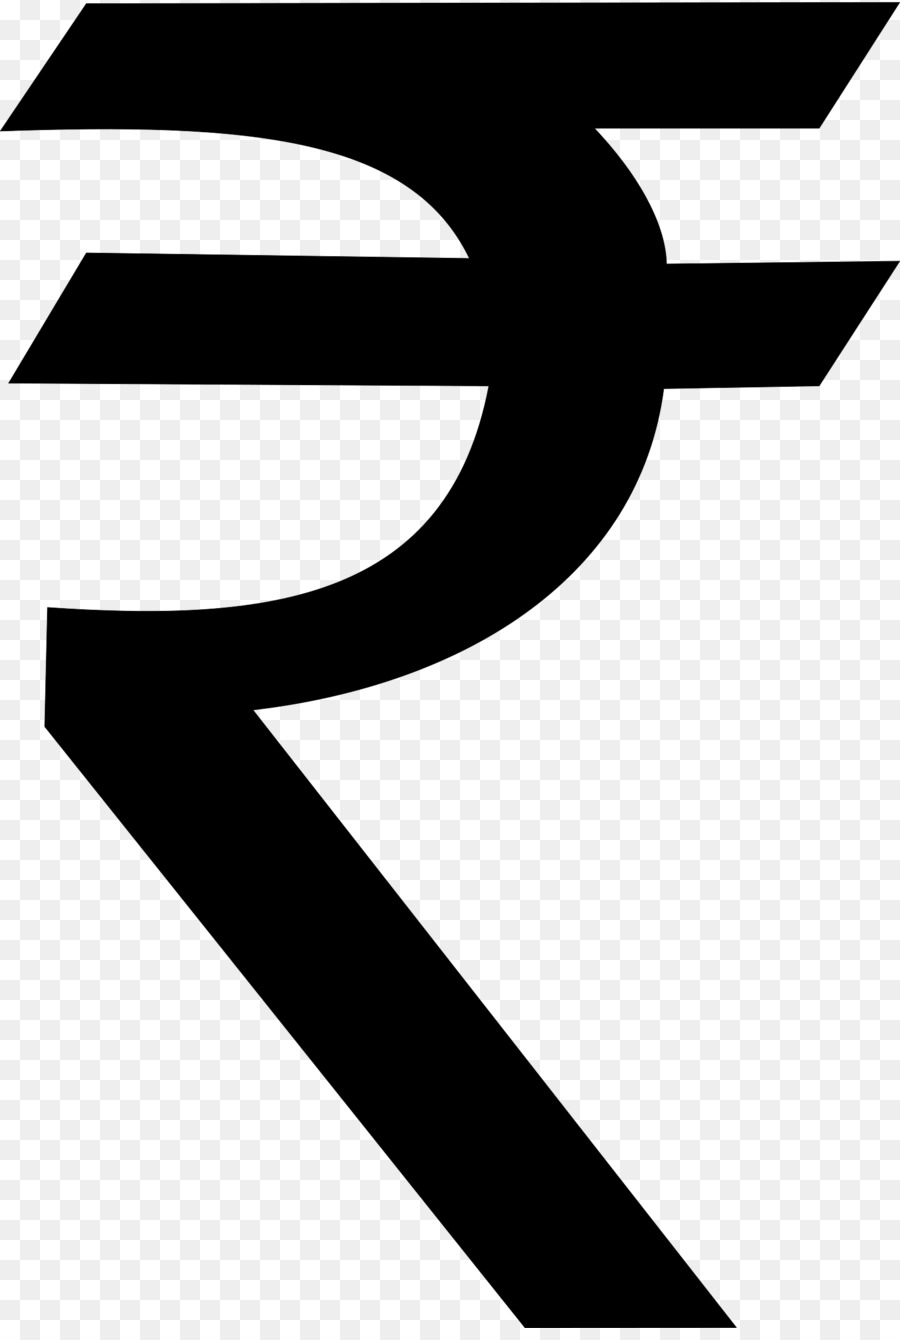 Indian rupee sign Currency - India png download - 1627*2400 - Free Transparent India png Download.